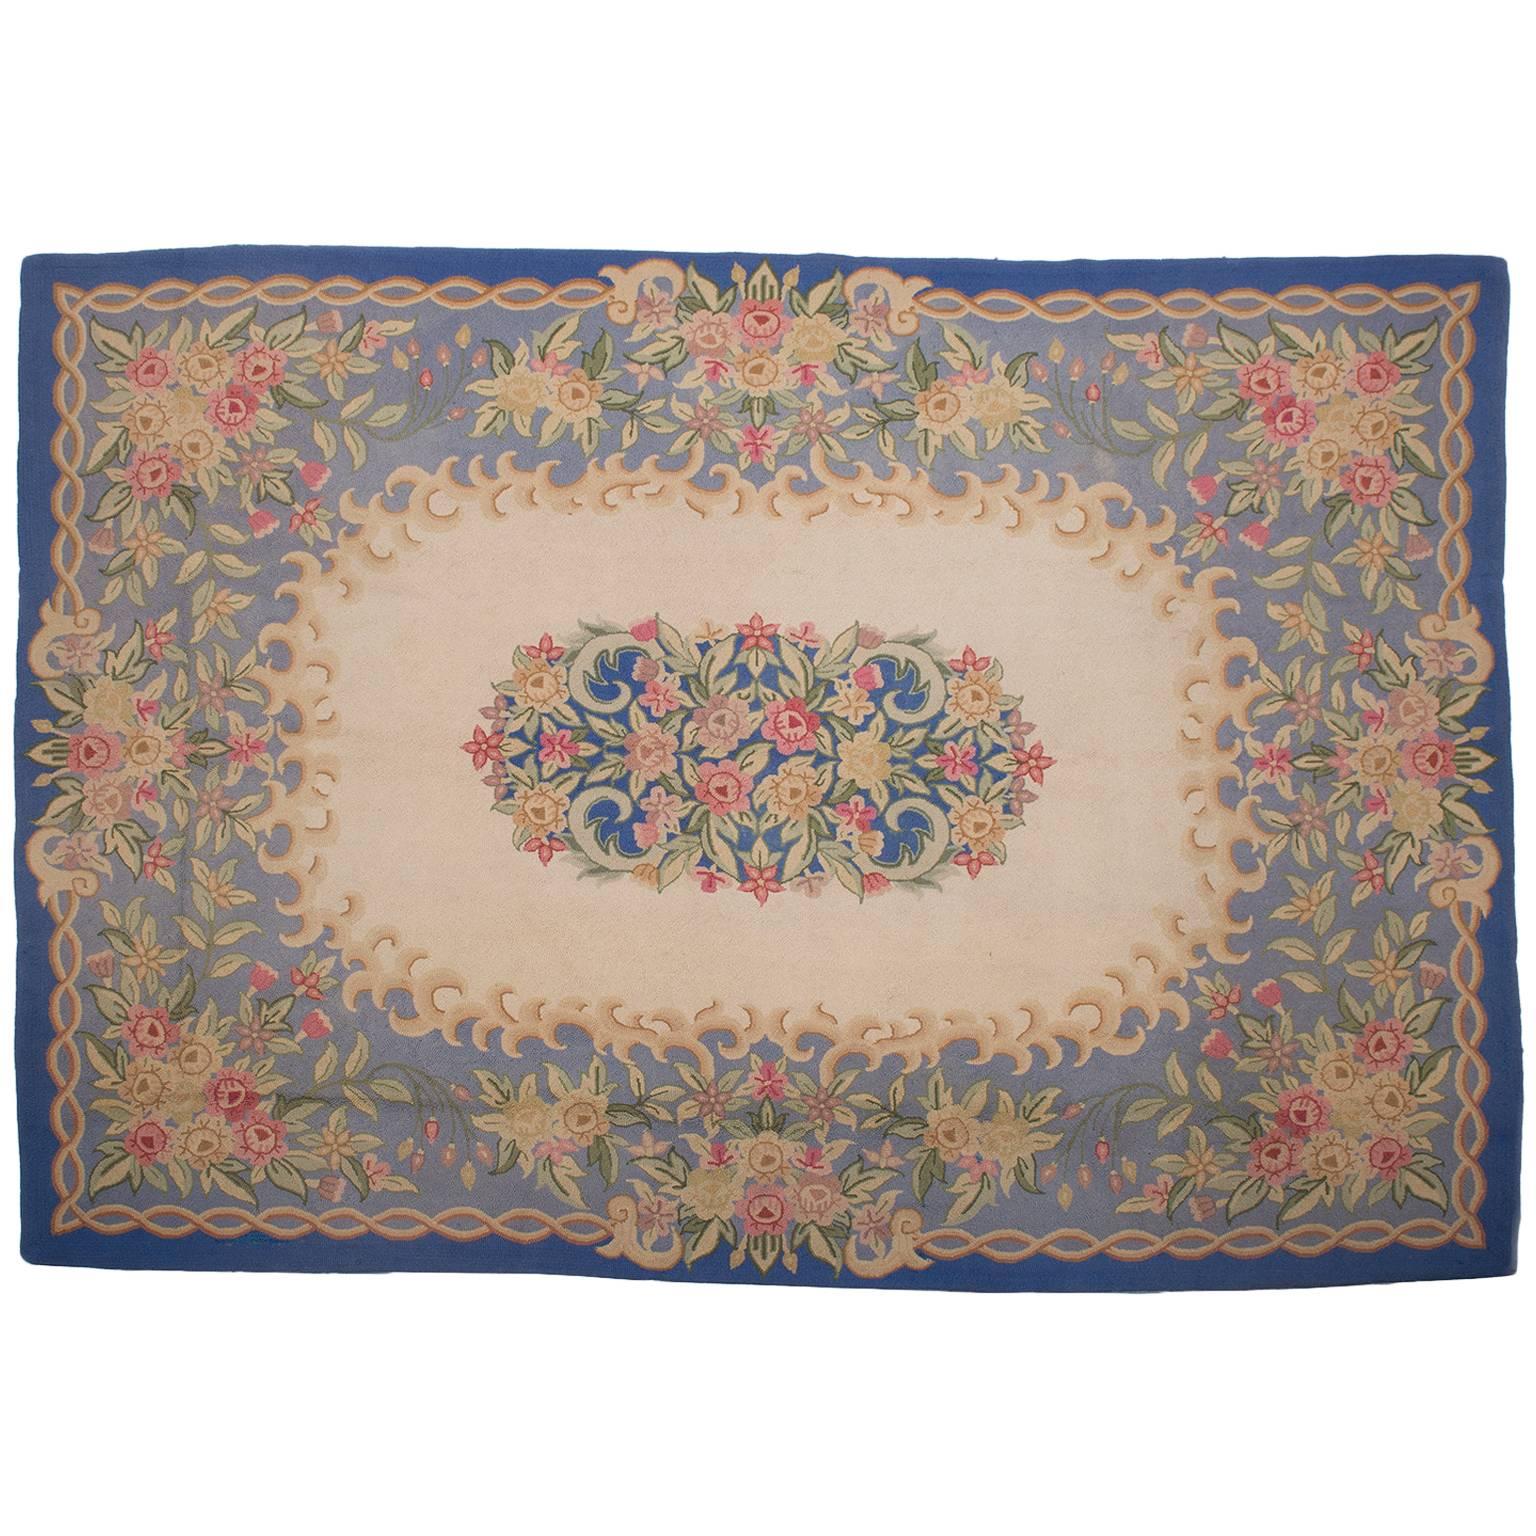   Hooked Carpet in Aubusson Style- FINAL CLEARANCE SALE